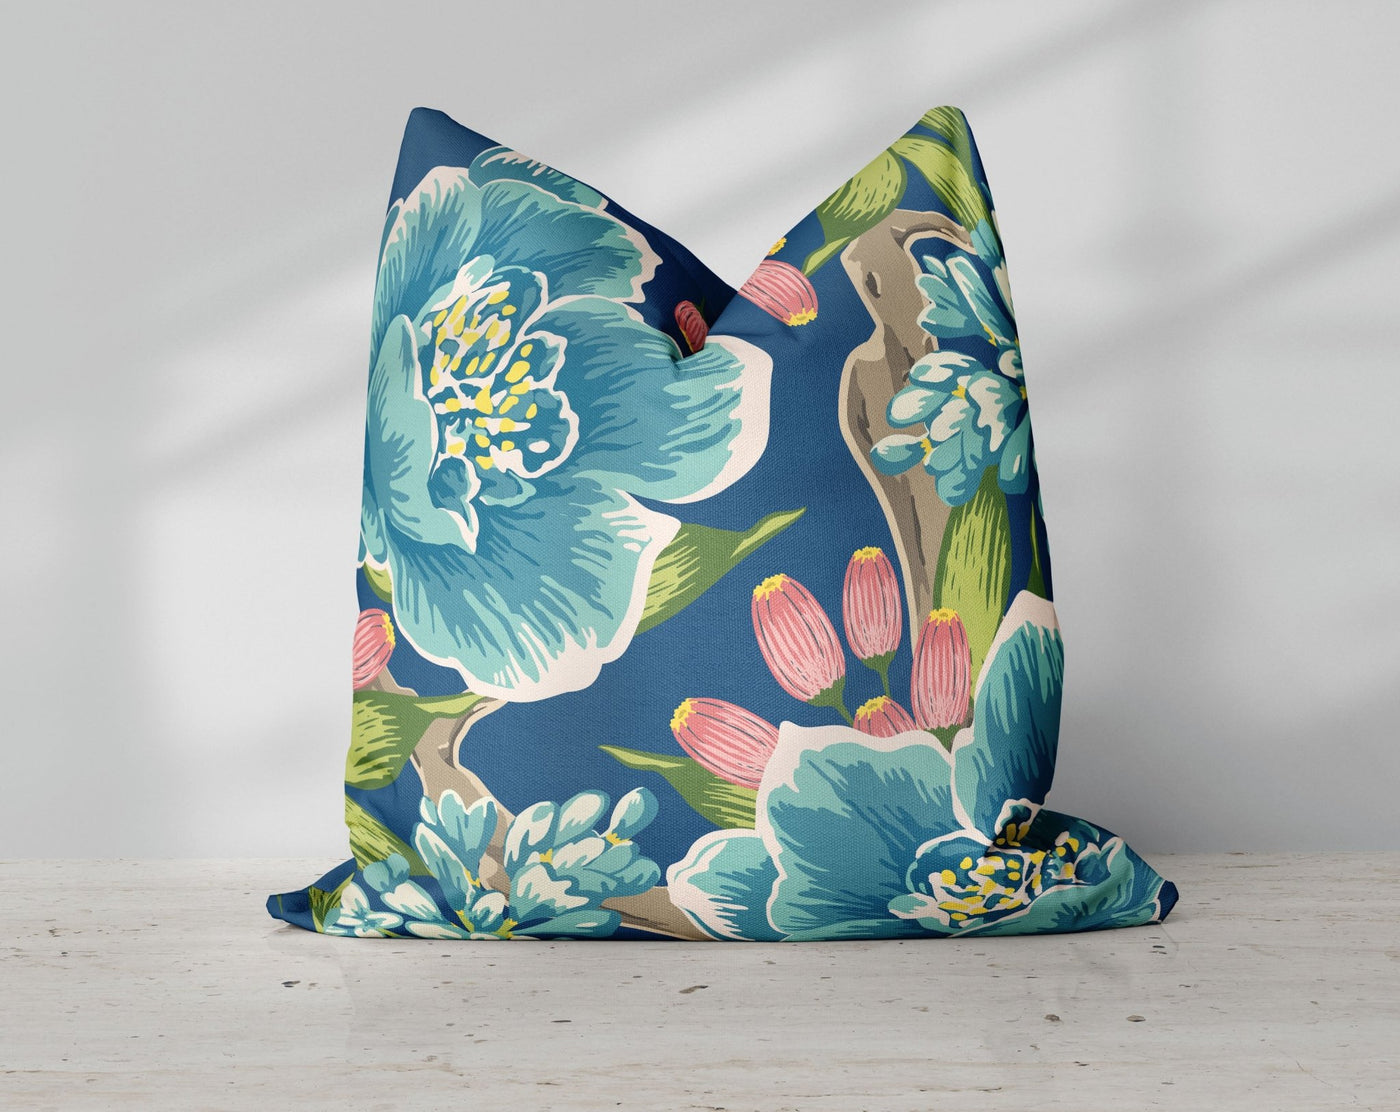 Exclusive Floral Blue Thibaut Inspired Pillow Throw Cover